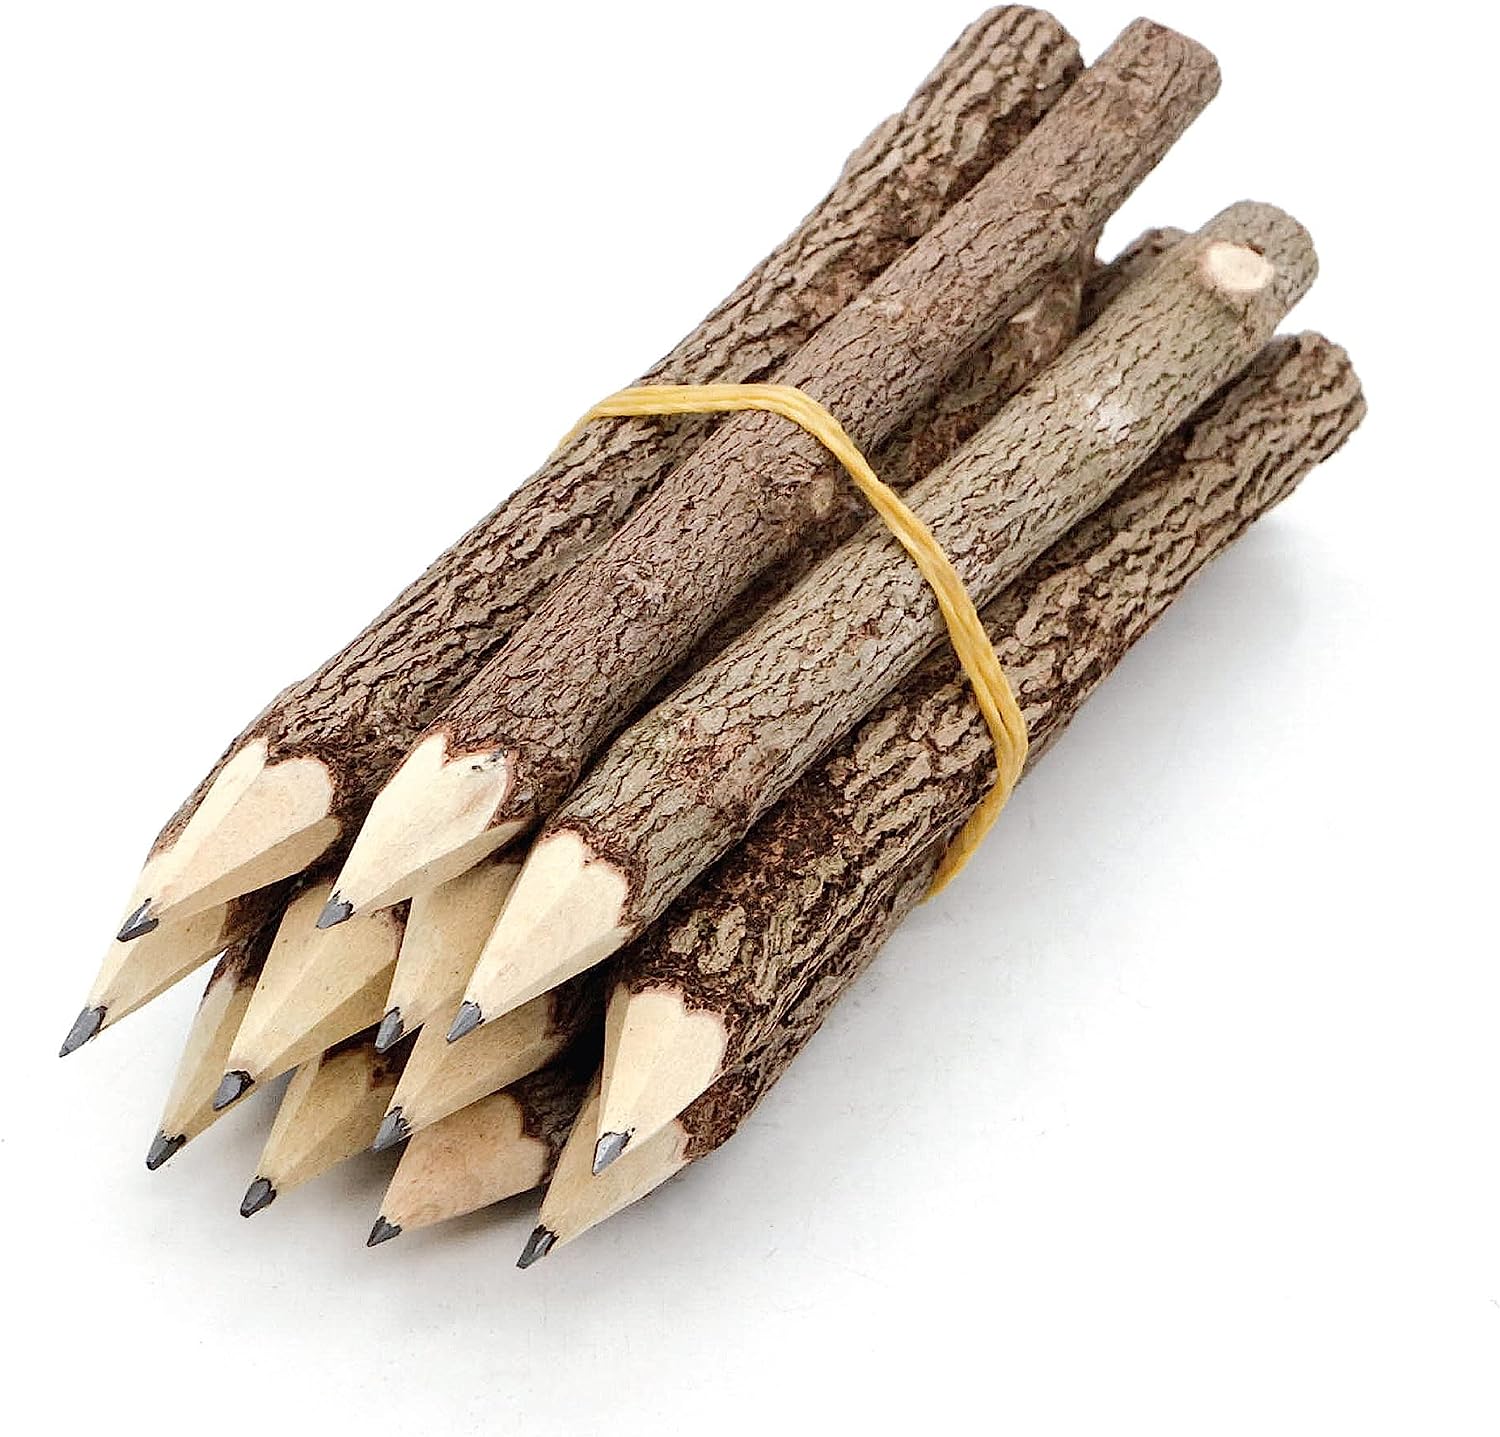 BSIRI Pencil Wood Favors of Graphite Wooden Tree Rustic Twig Pencils Unique Birch of 12 Camping Lumberjack Decorations Party Supplies Novelty Gifts as a Natural Pencil Gifts for Kids in Classroom